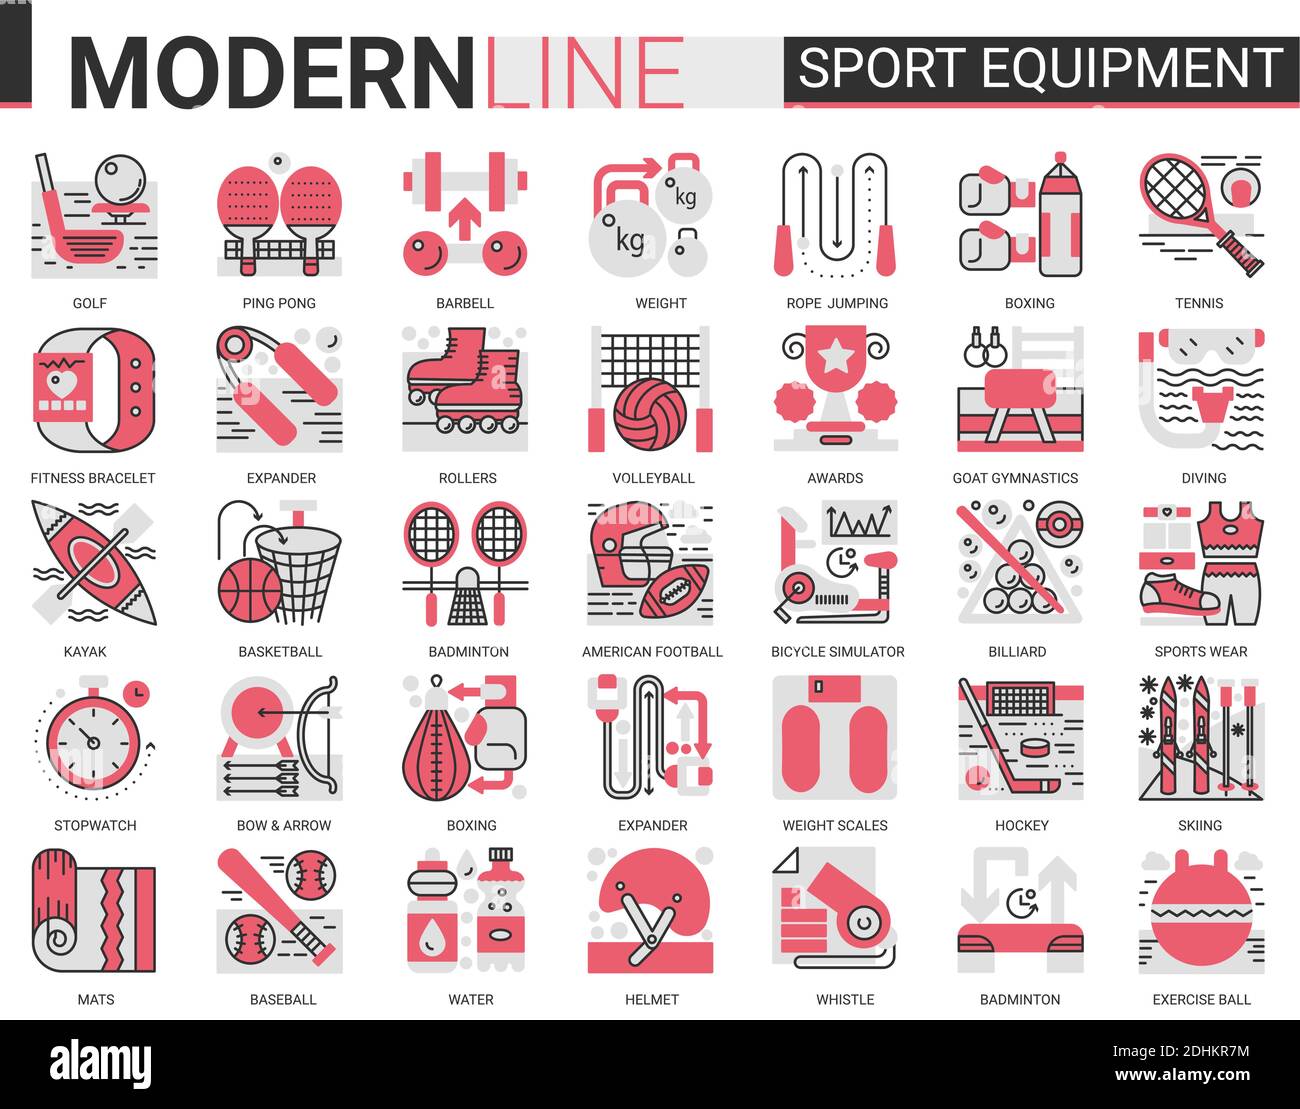 Sport fitness equipment complex red black flat line icon vector illustration set. Sport gear for sportsman symbols with sportswear, exercise gym item, football baseball badminton tennis game. Stock Vector